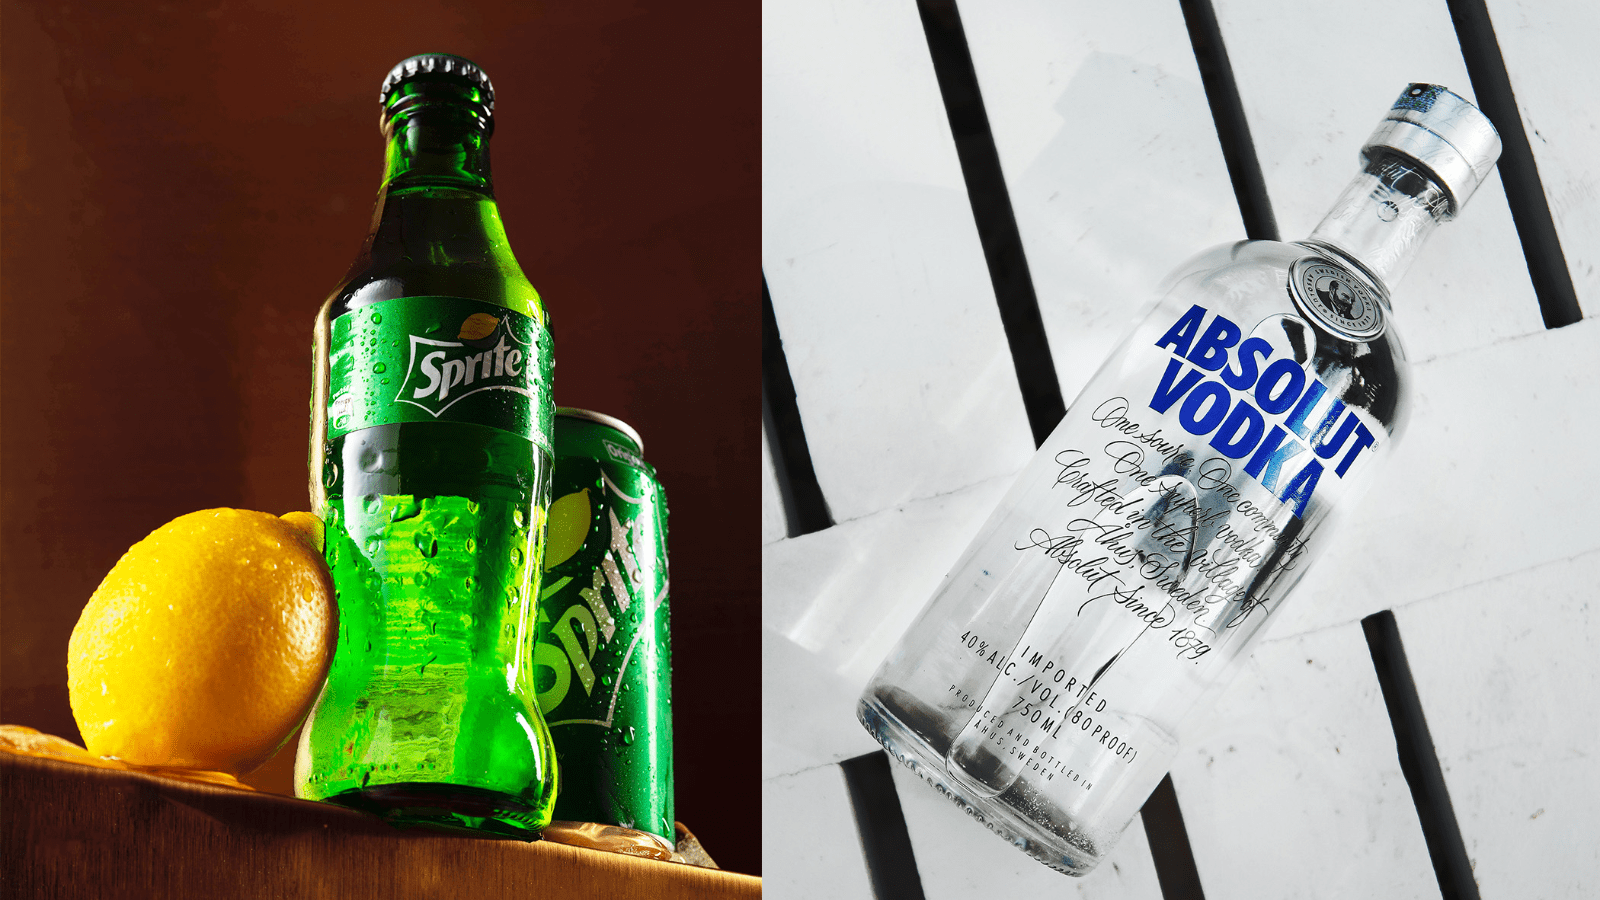 Coca-Cola ties up with Pernod Ricard to launch Absolut & Sprite RTD cocktail